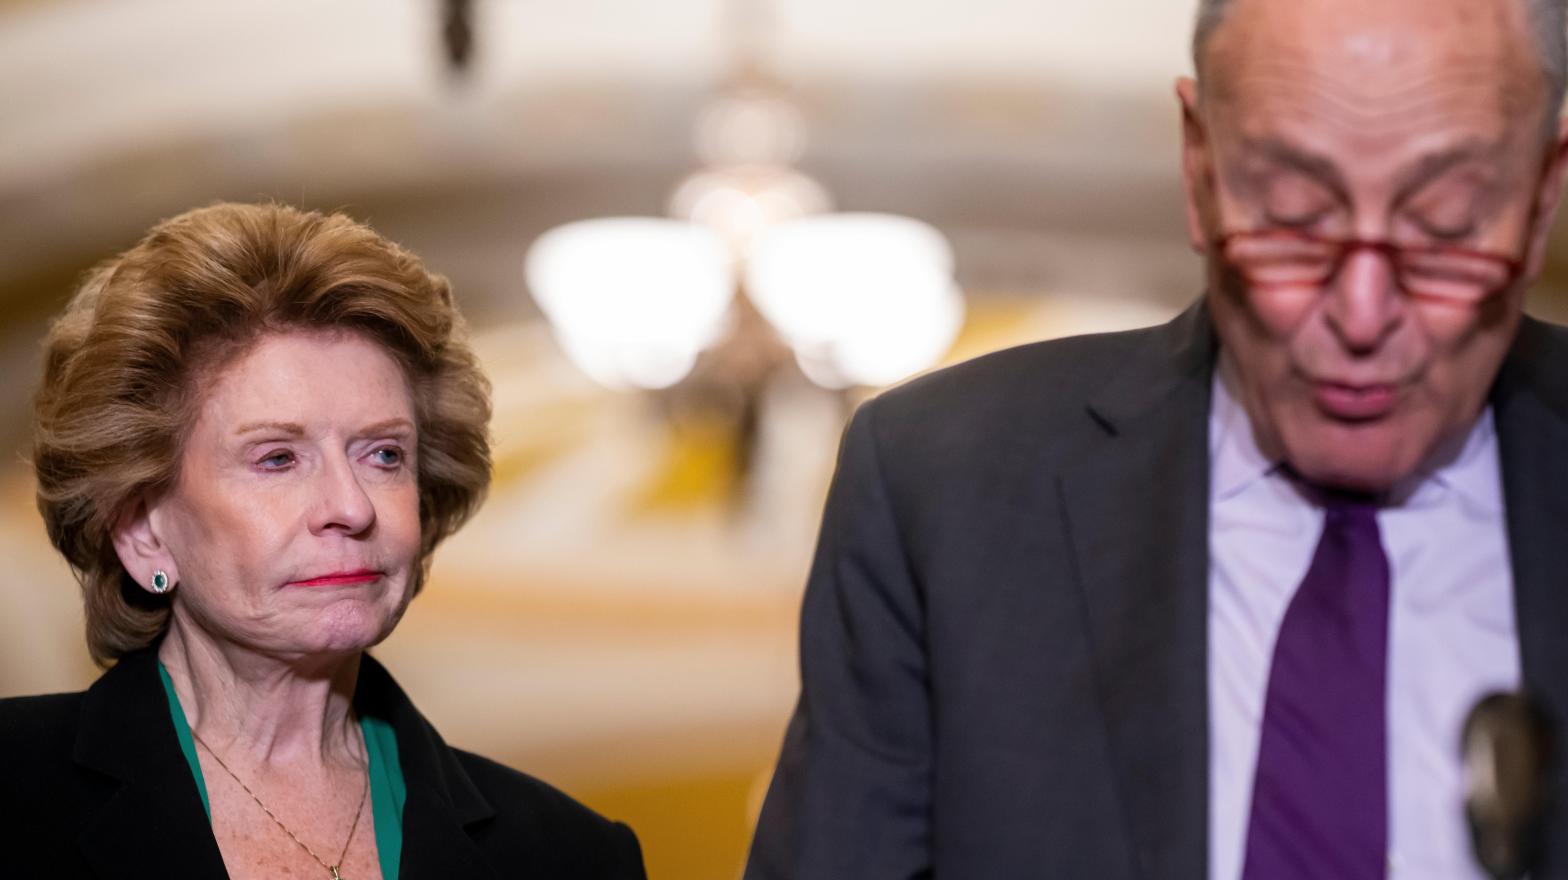 Sen. Debbie Stabenow received over $US56,000 ($77,739) from FTX and its execs. Senate Majority Leader Chuck Schumer also received some campaign funds from the failed exchange. (Photo: Nathan Howard, Getty Images)